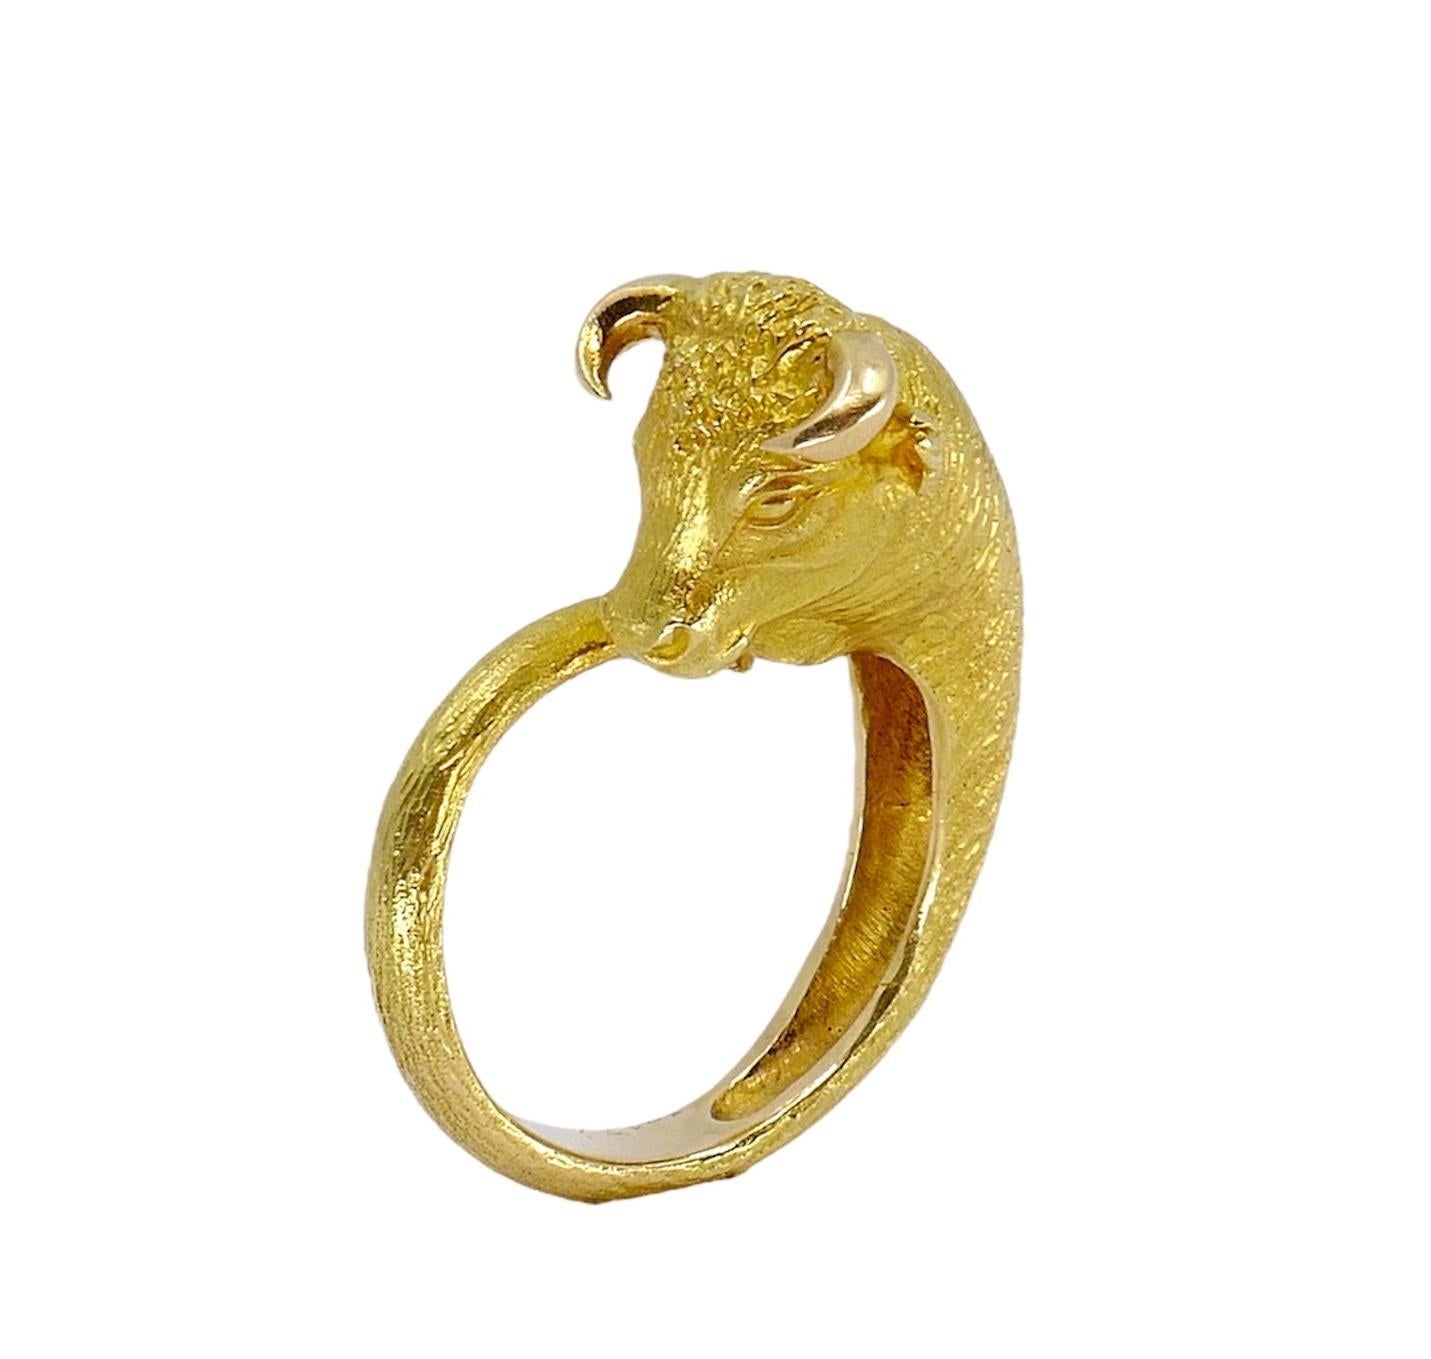 Crafted by esteemed jeweler George L'Enfant for Cartier Paris in the 1970s, this 18k gold ring showcases a bold bull Taurus motif, symbolizing strength and resilience. Sized at 7.5, it boasts a weight of 13.1 grams, offering both substance and